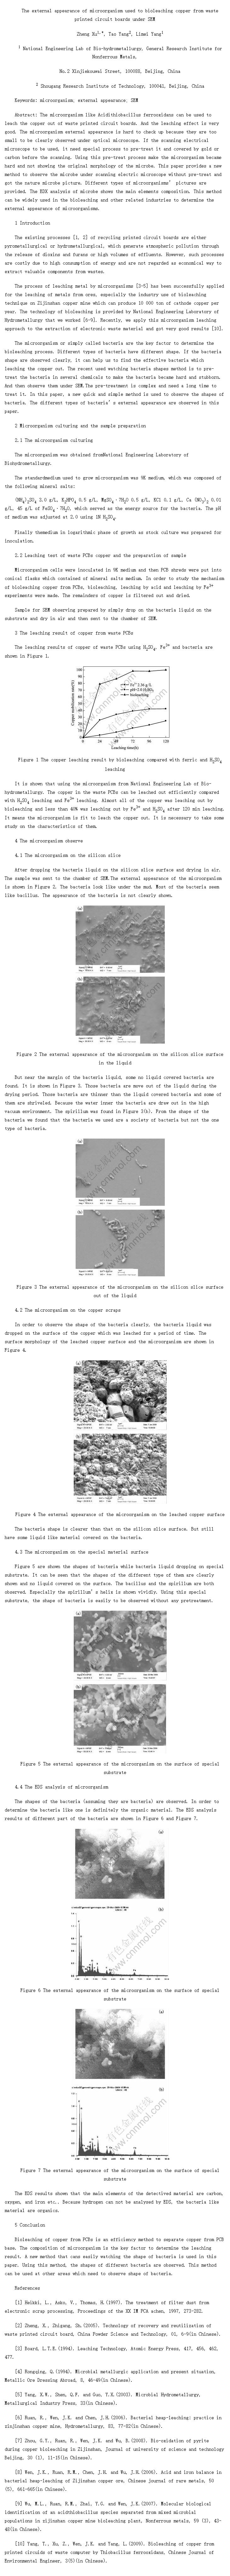 The external appearance of microorganism used to bioleaching copper from waste printed circuit boards under SEM